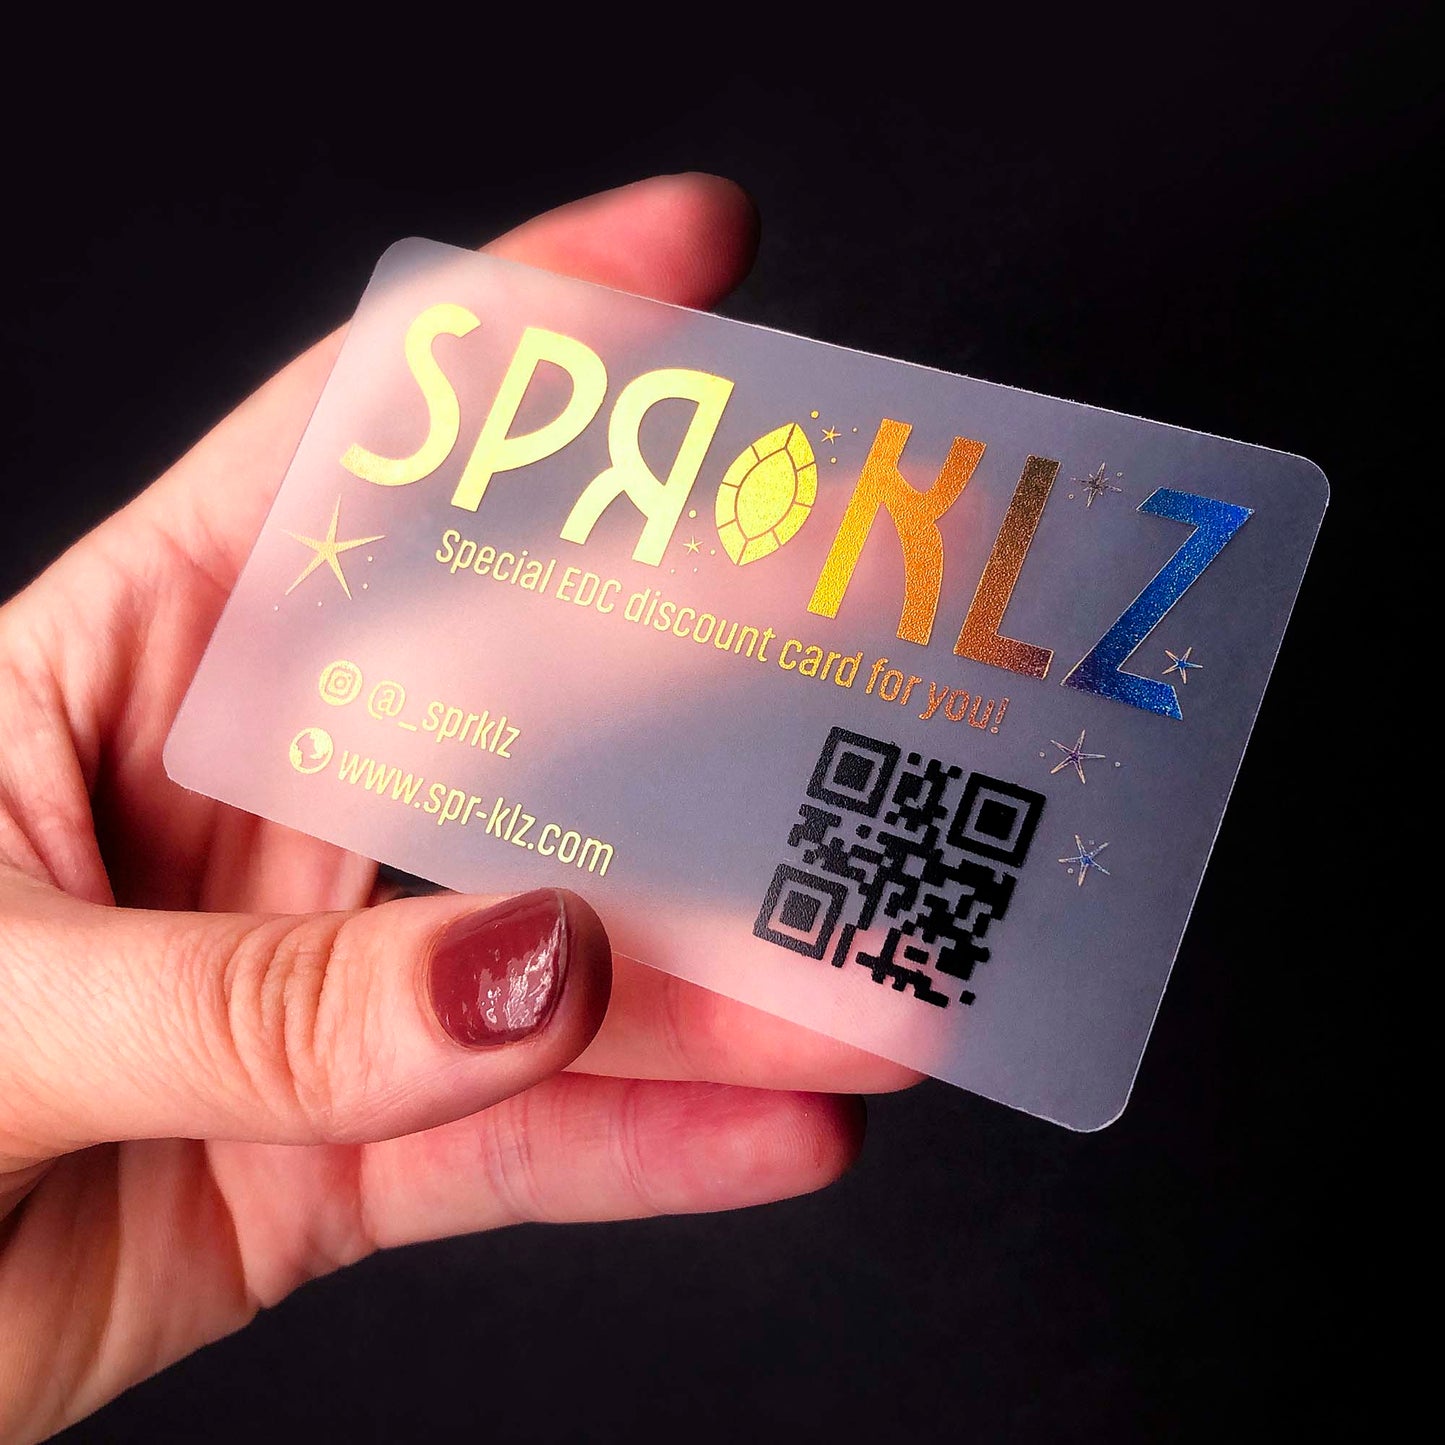 Translucent plastic business card with QR code for modern networking. Stand out with innovative design.